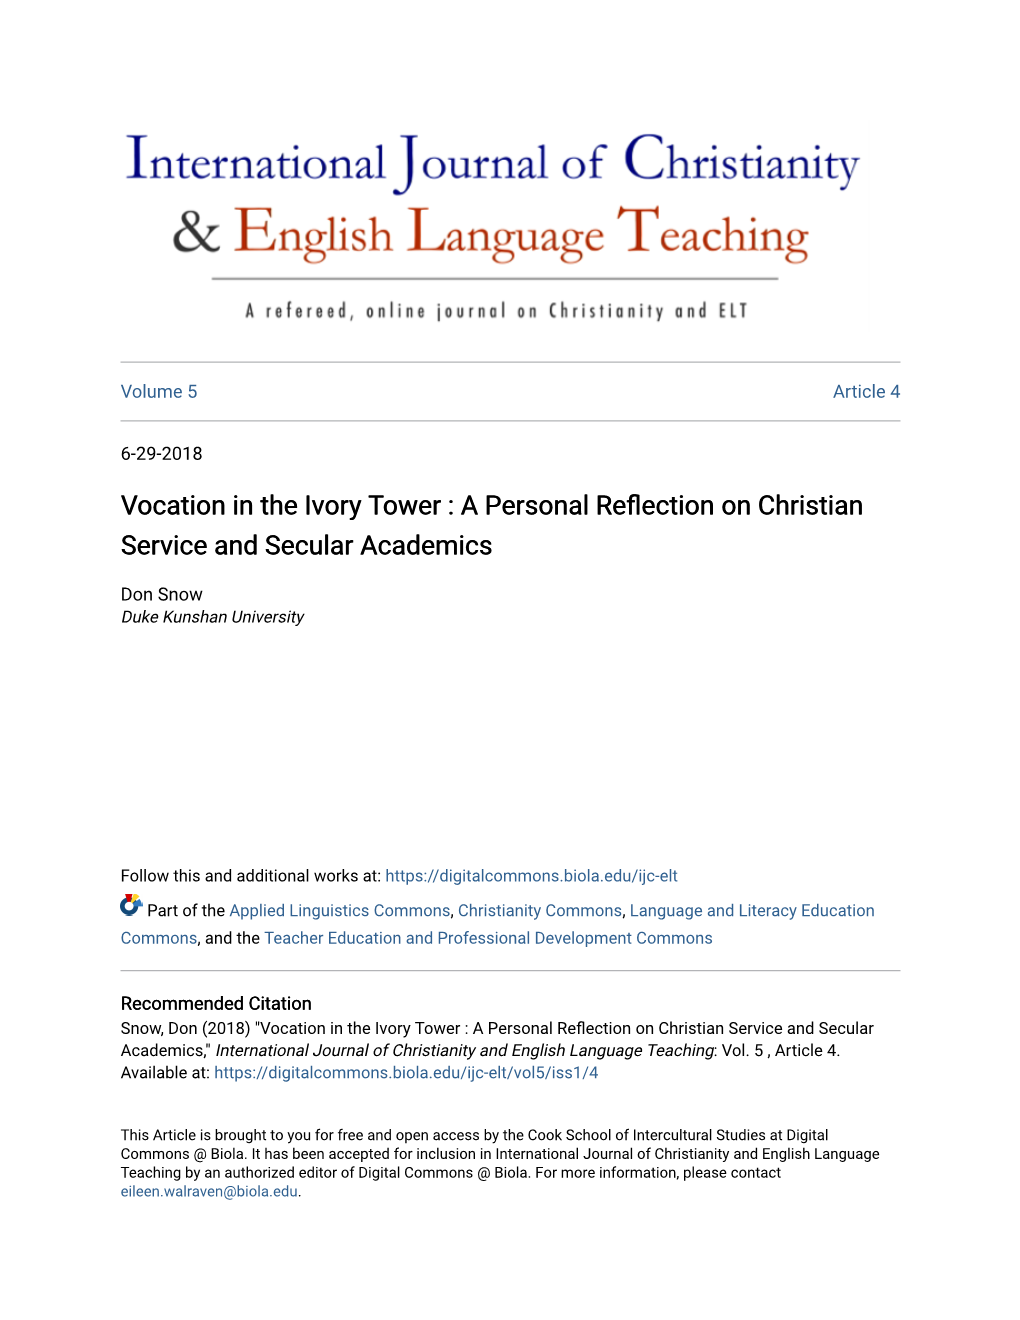 Vocation in the Ivory Tower : a Personal Reflection on Christian Service and Secular Academics